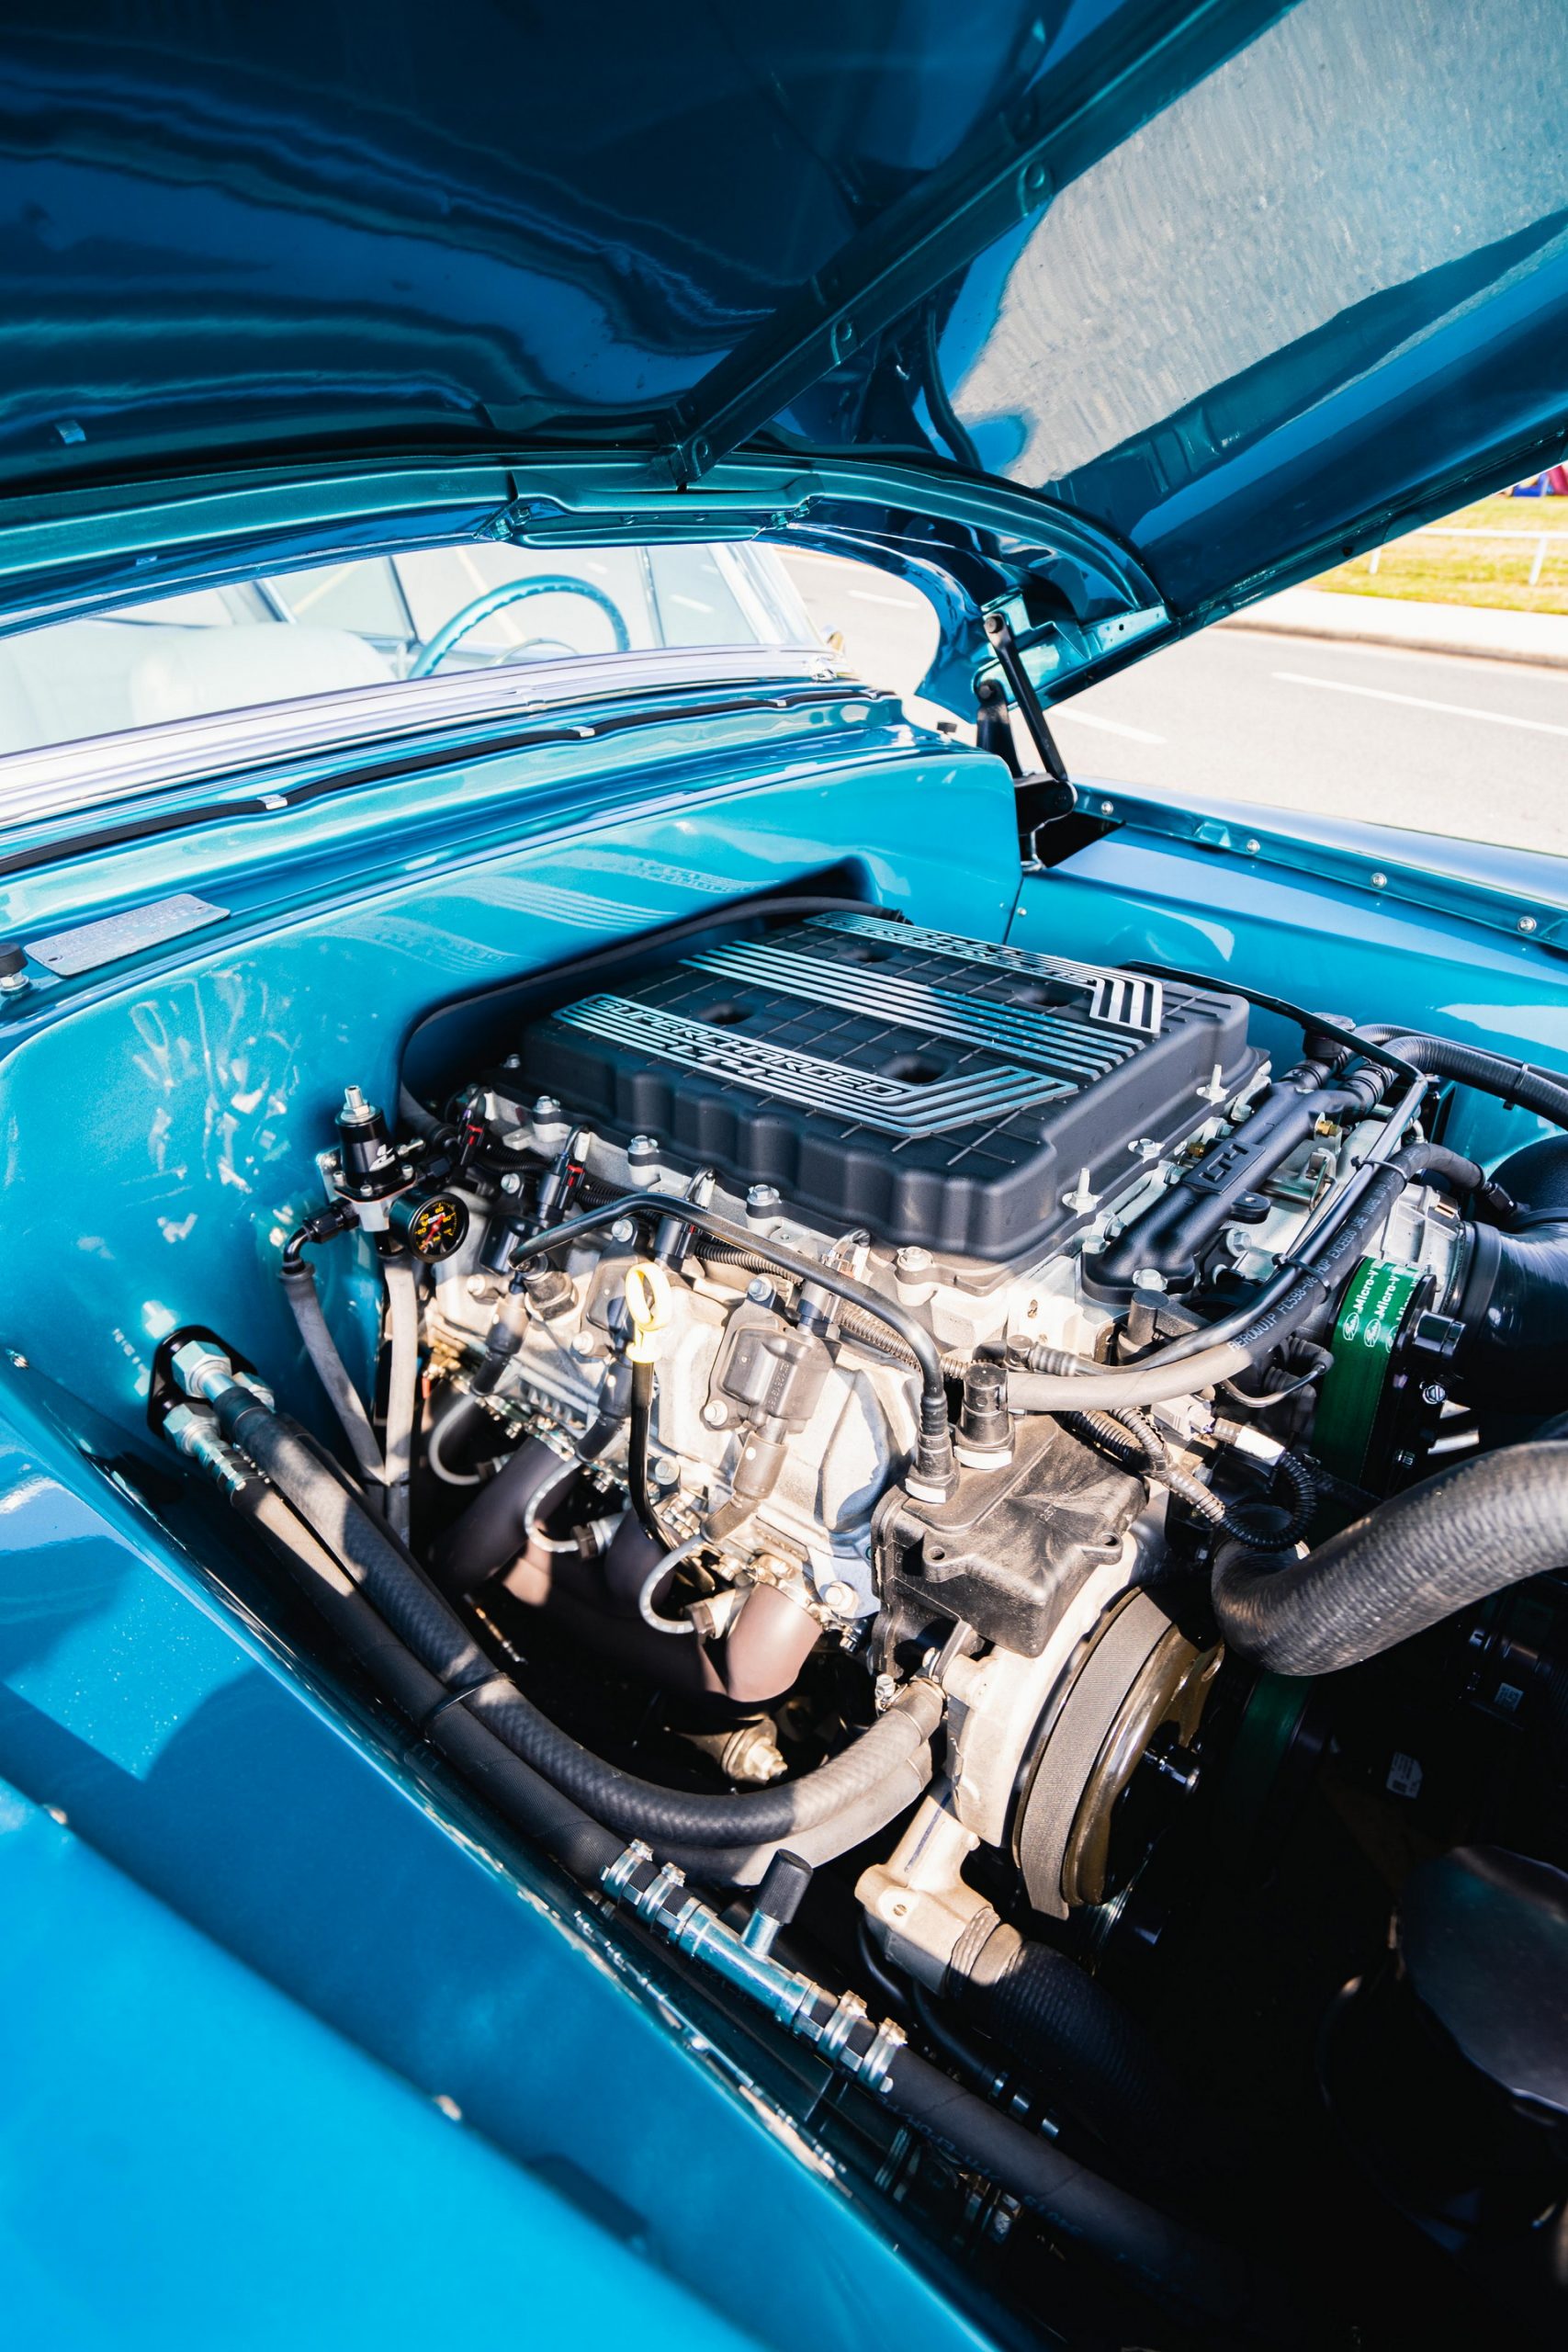 Priced at $ 350,000, will this '54 Chevy Bel Air Restomod 640 HP packaging in old school style shake your world?